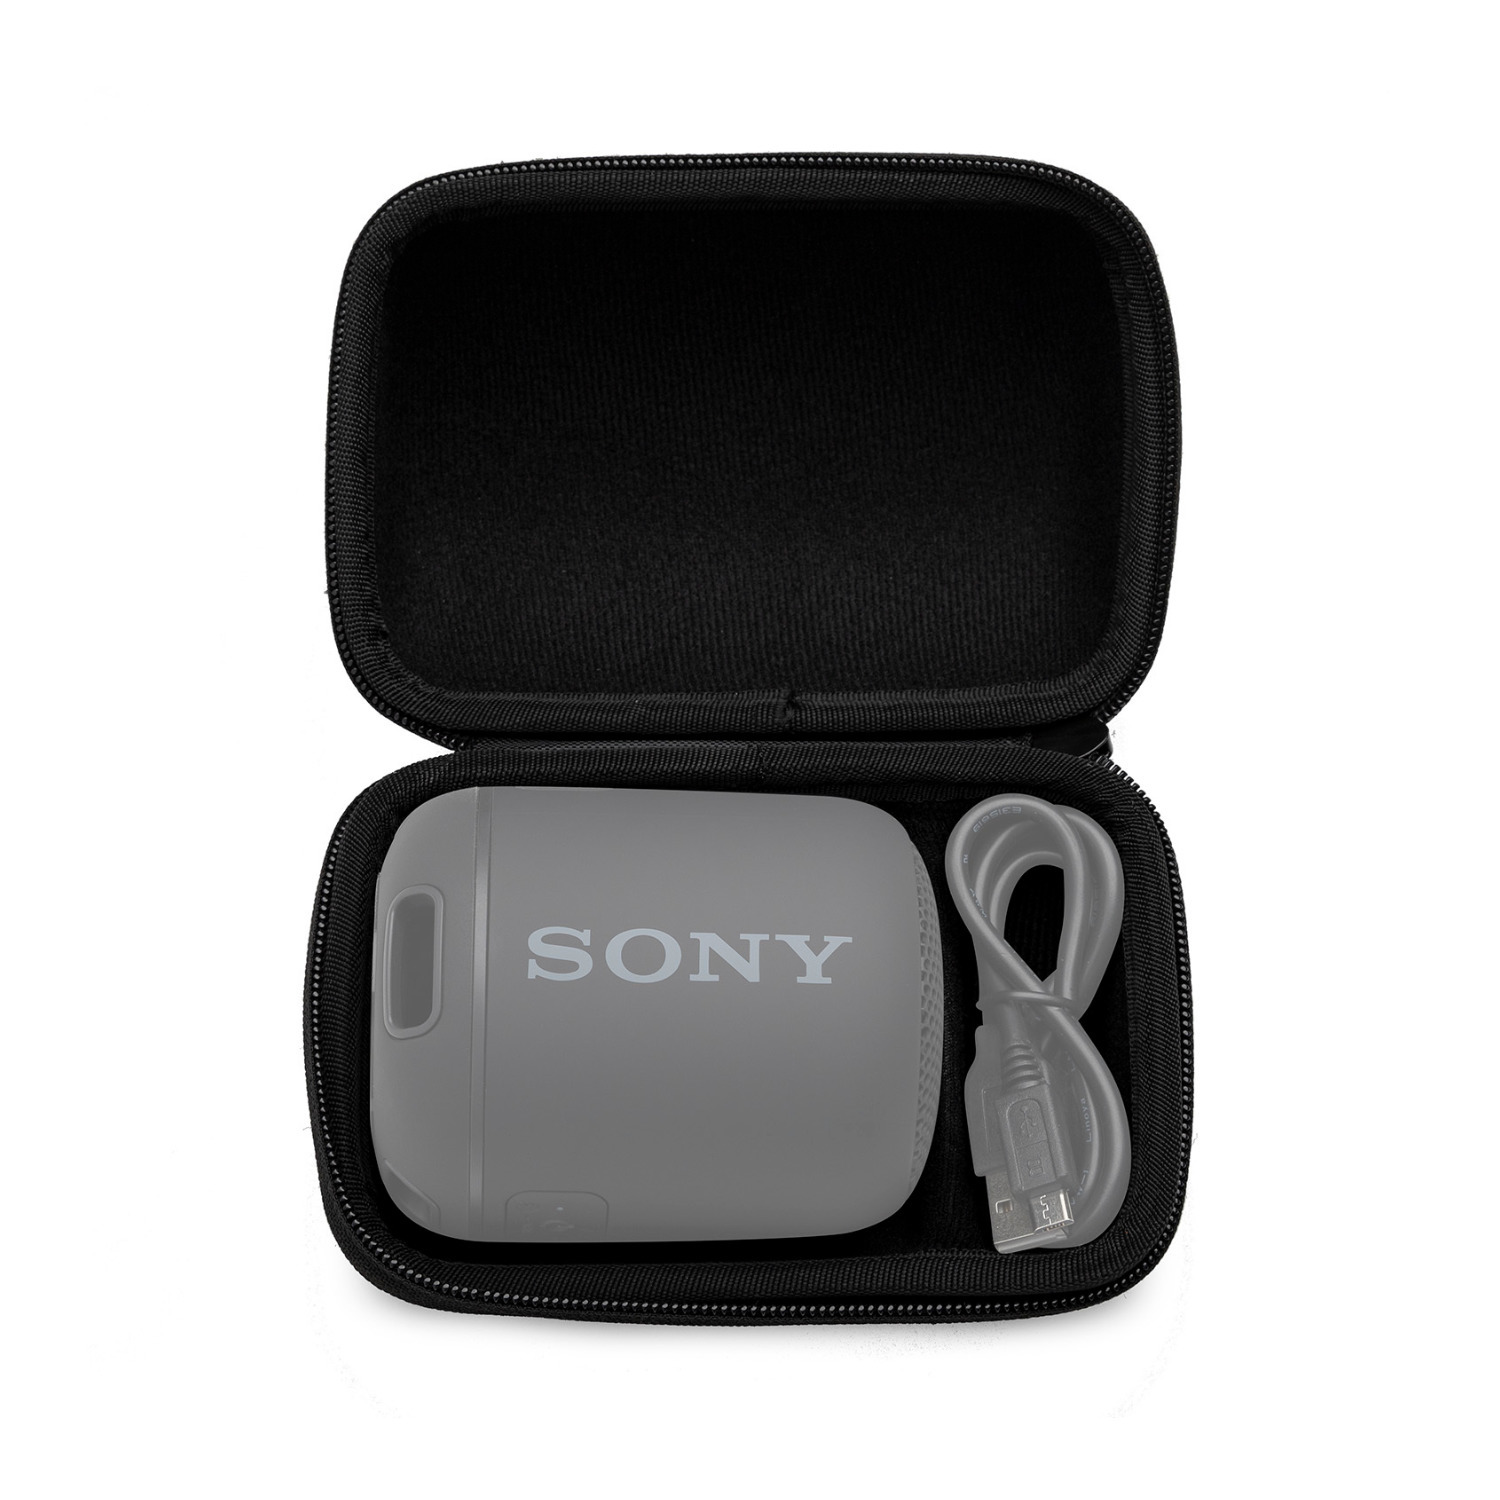 Knox Gear Hard Shell Case Compatible with Sony SRSXB10 & SRSXB12 Speakers - image 1 of 4